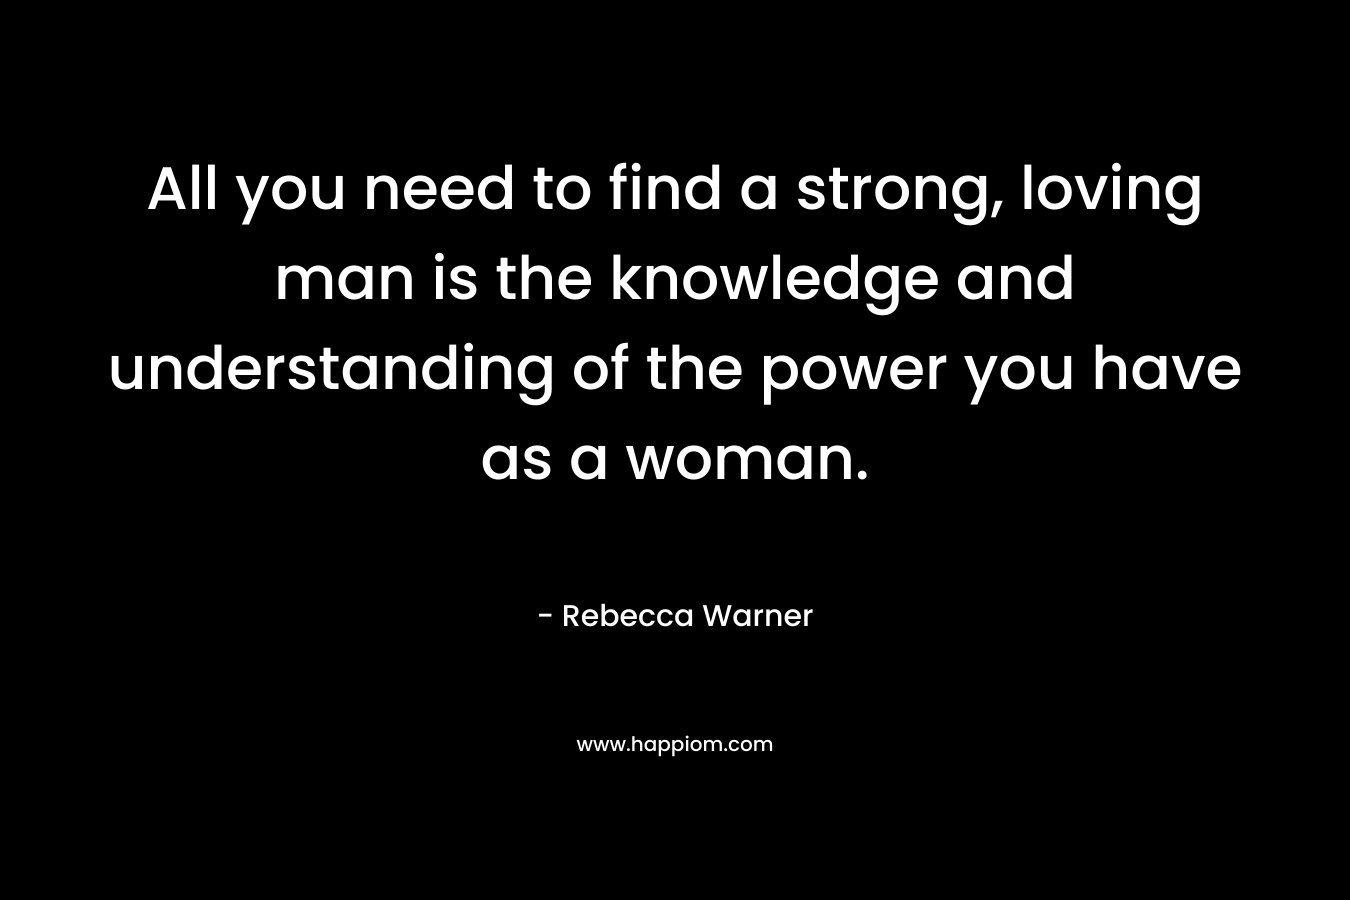 All you need to find a strong, loving man is the knowledge and understanding of the power you have as a woman.